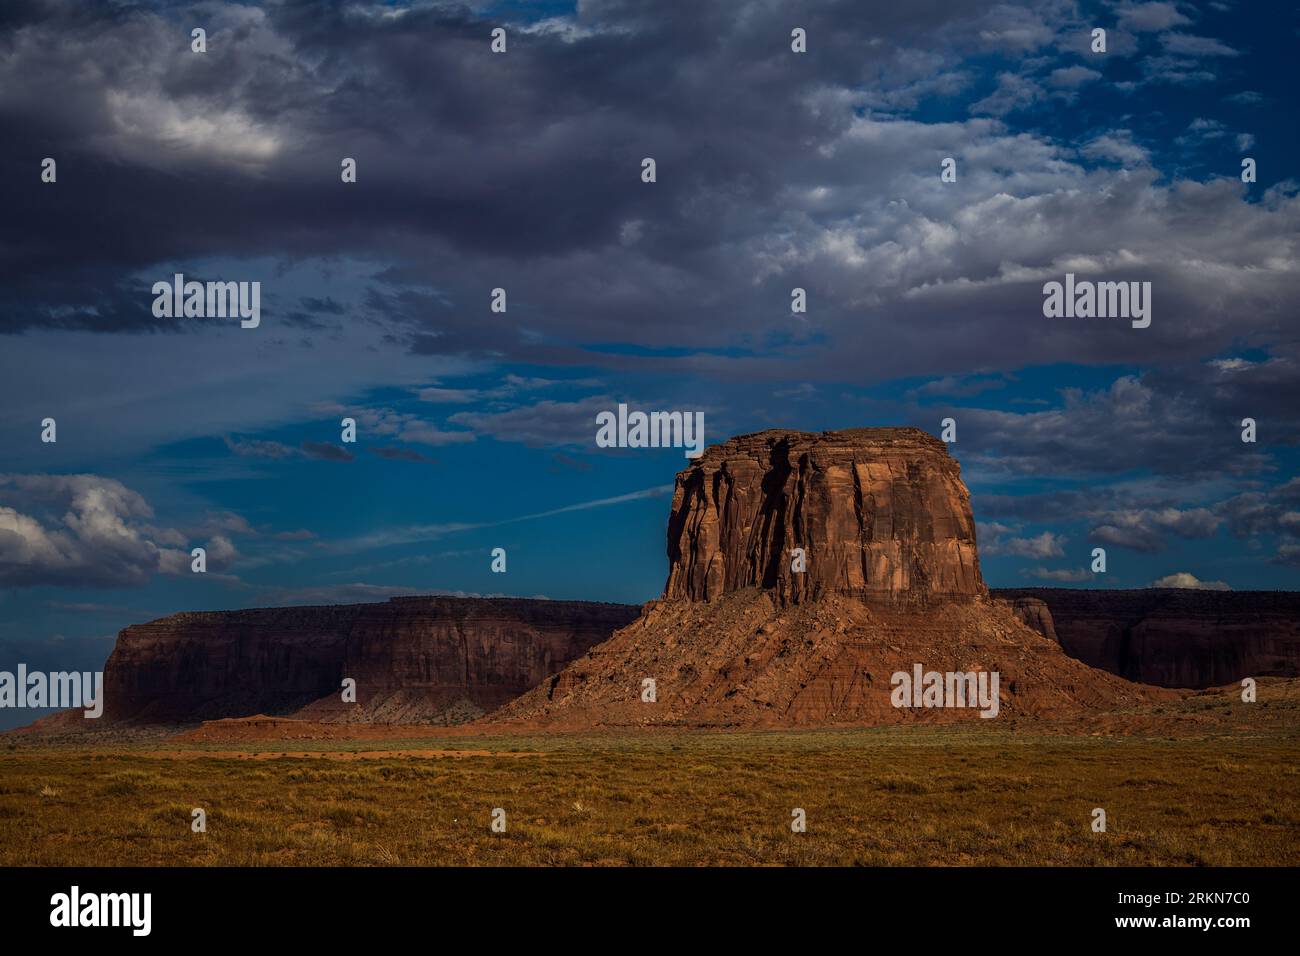 Iconica Hollywood, John Ford Point. Monument Valley, Arizona Foto Stock